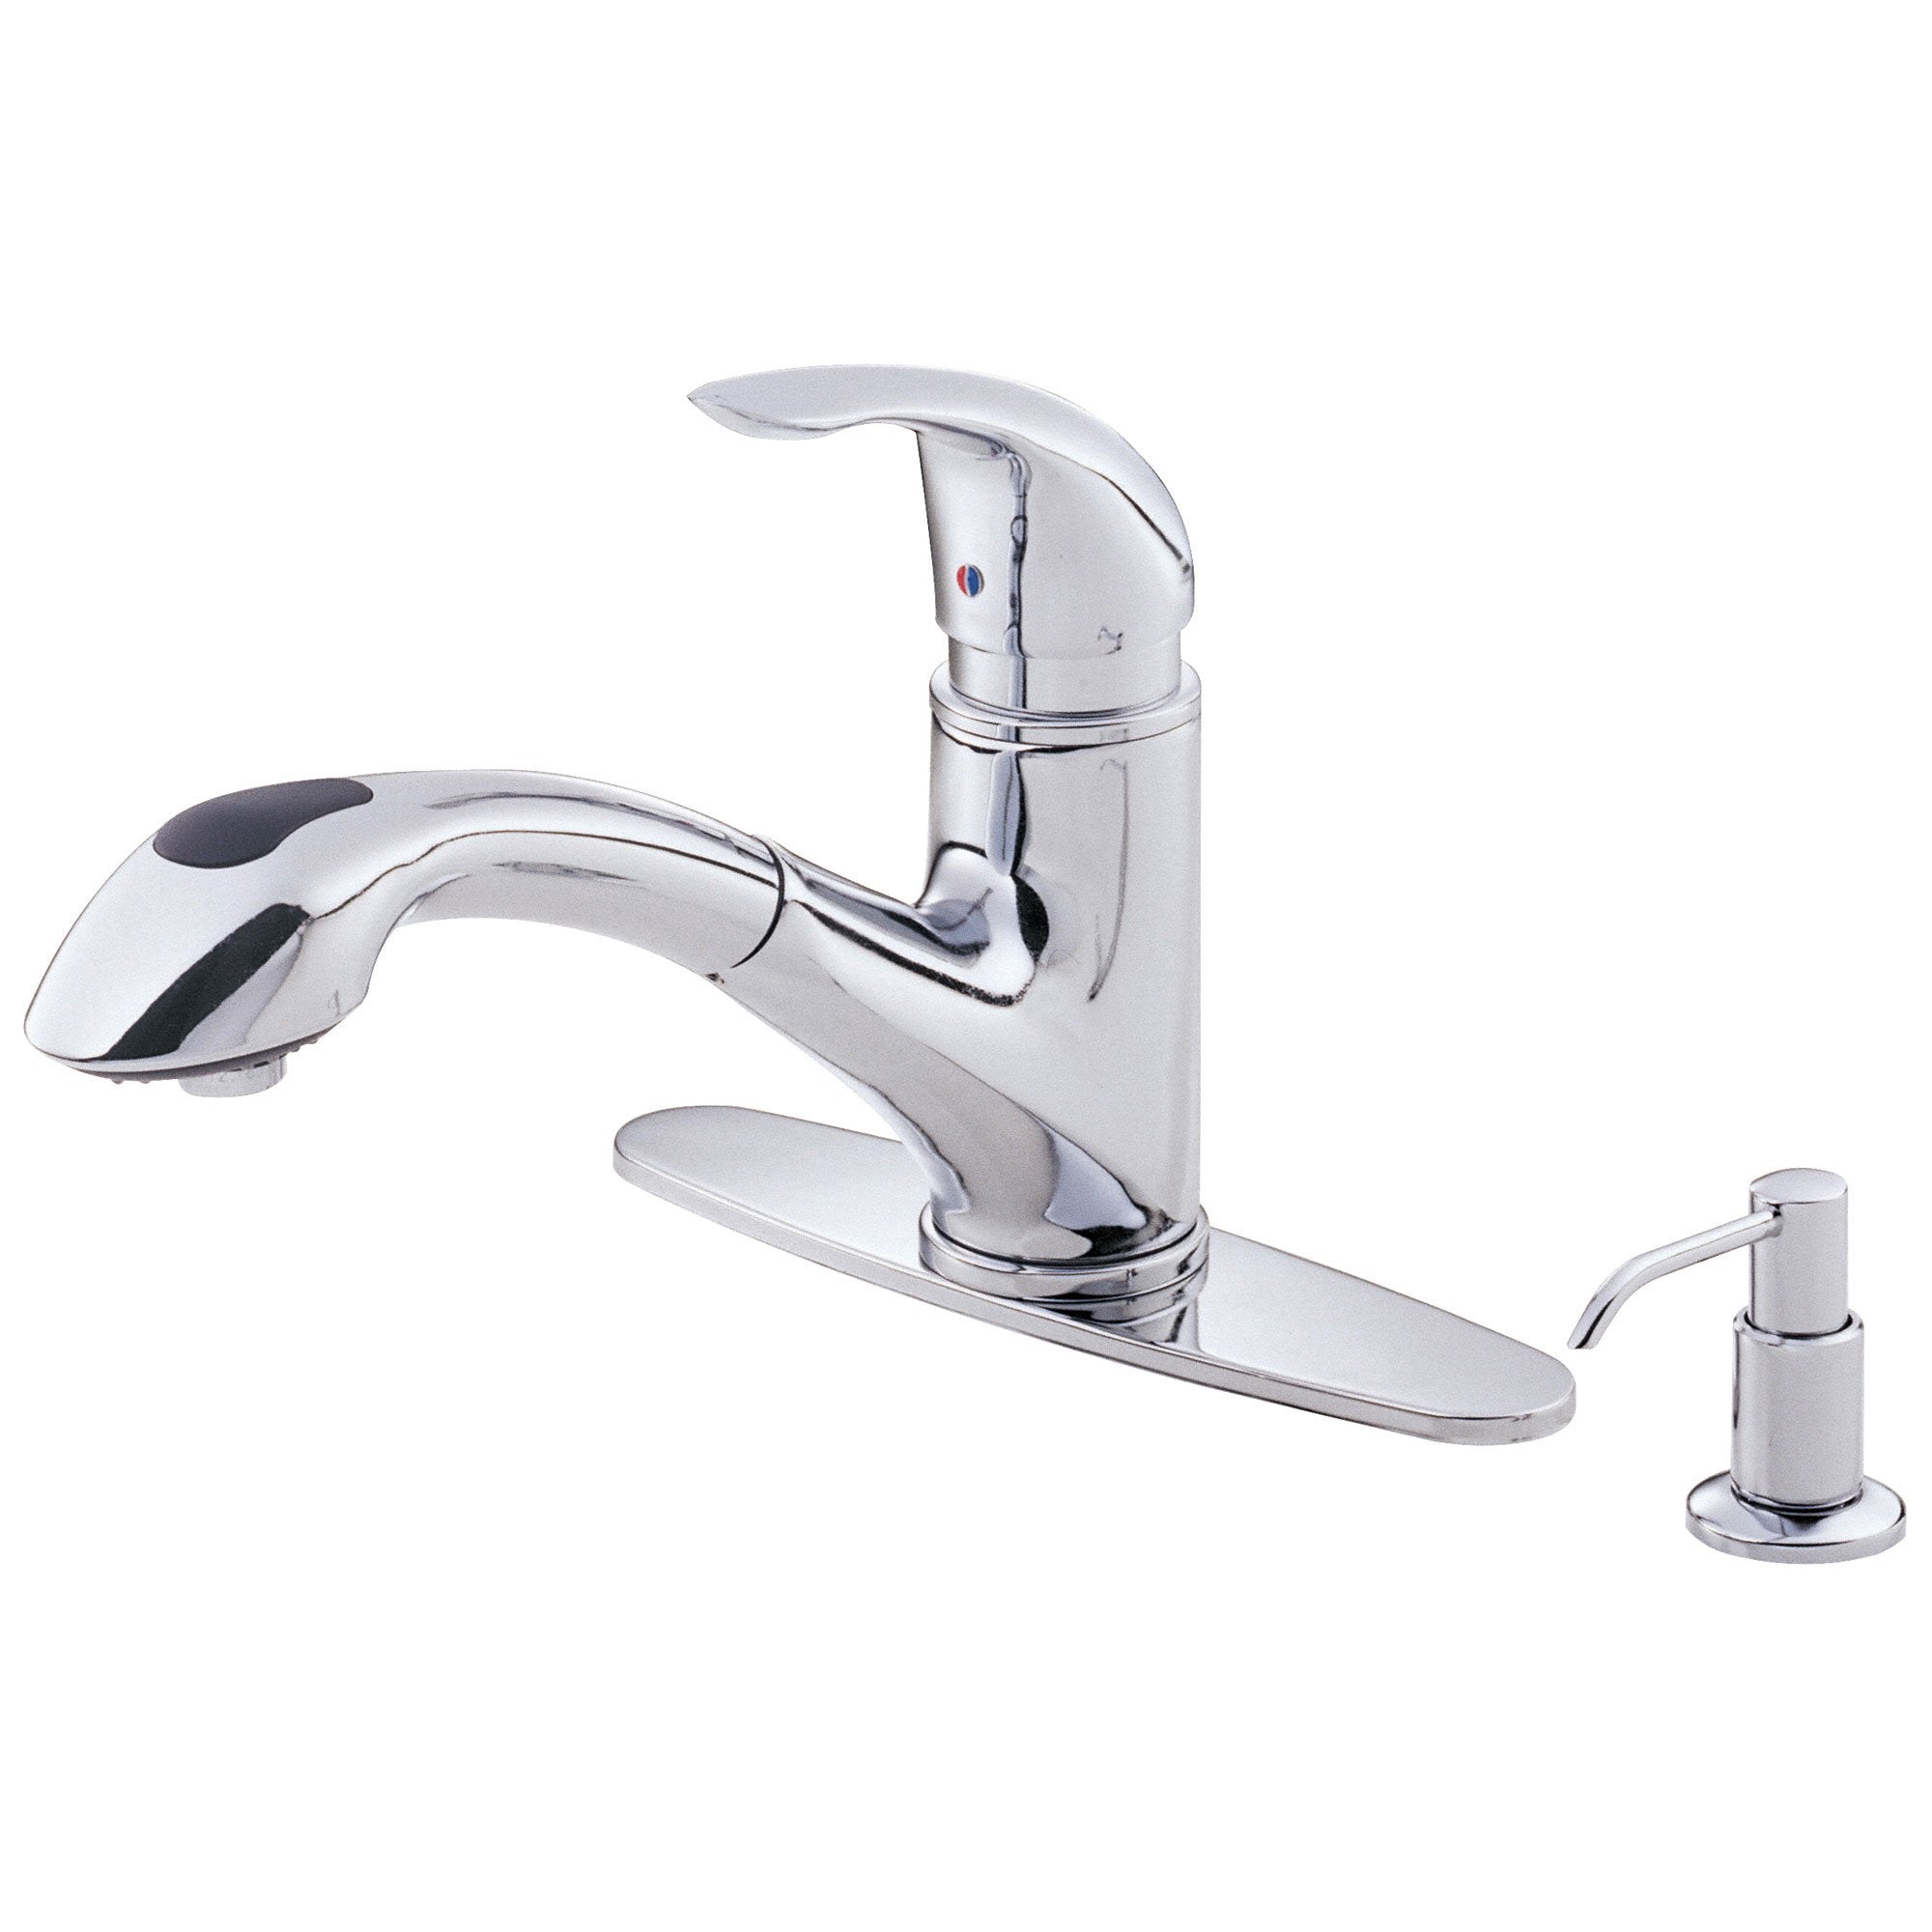 Danze Melrose Modern Chrome Pull Out Kitchen Faucet With Soap